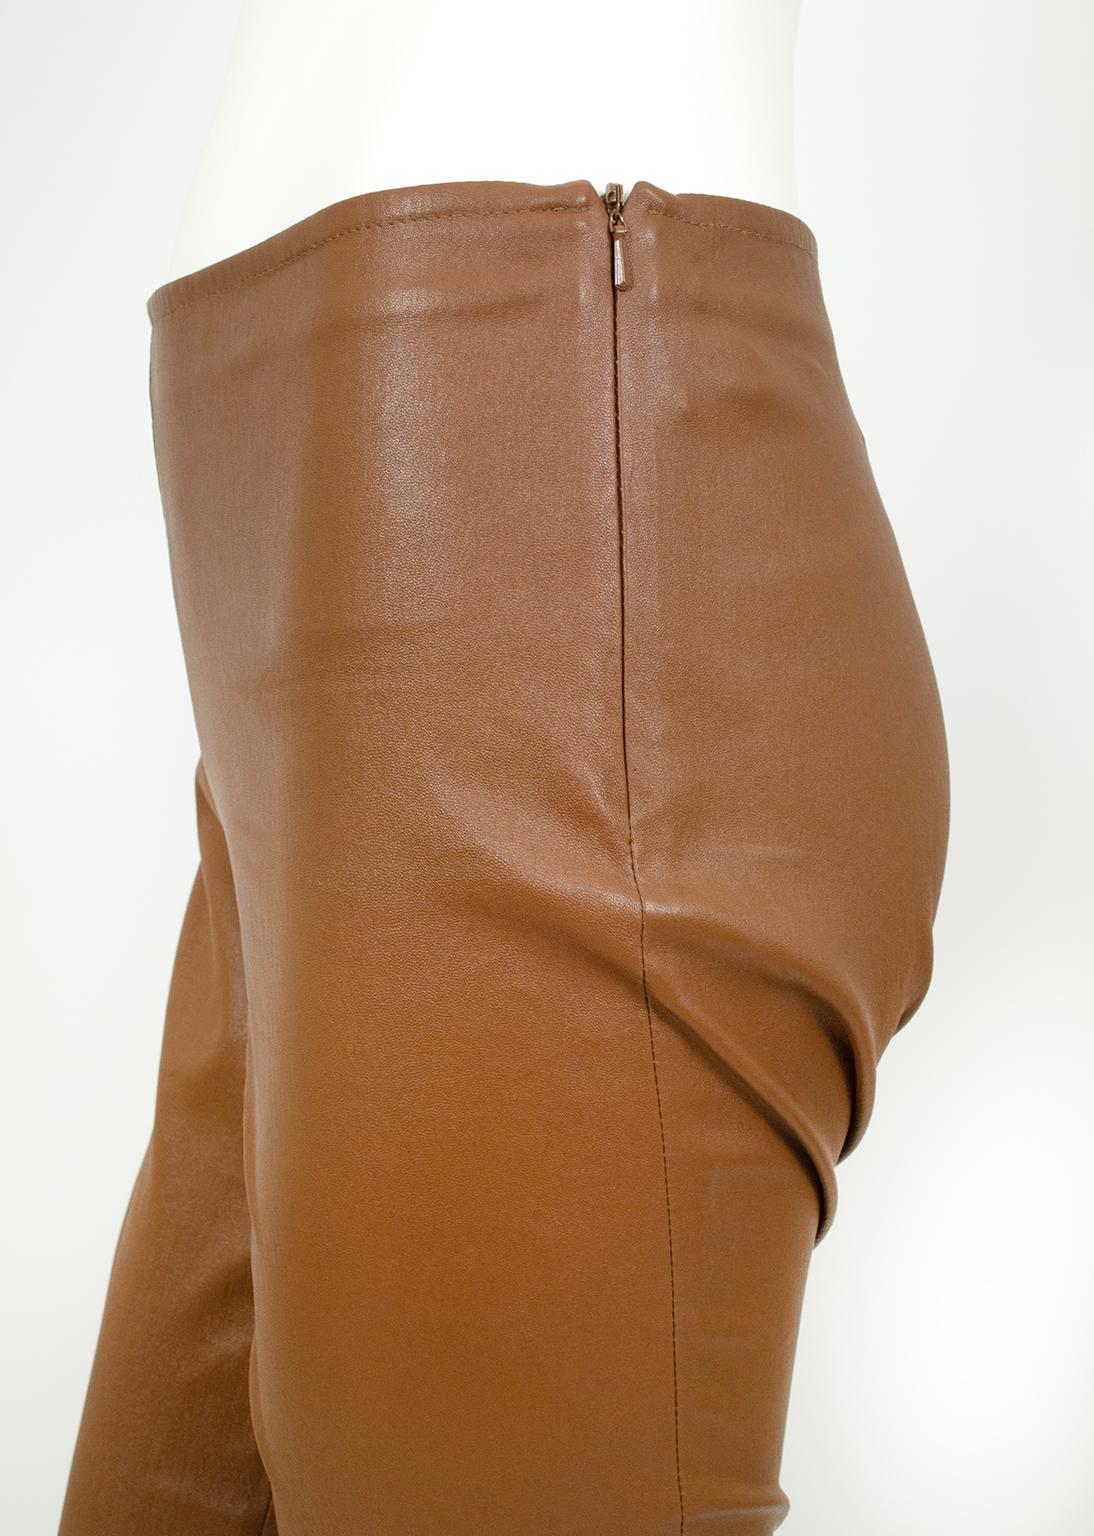 New The Row Ellerton Brown Leather Ankle Zip Stretch Moto Leggings – XS-S, 2011 For Sale 4